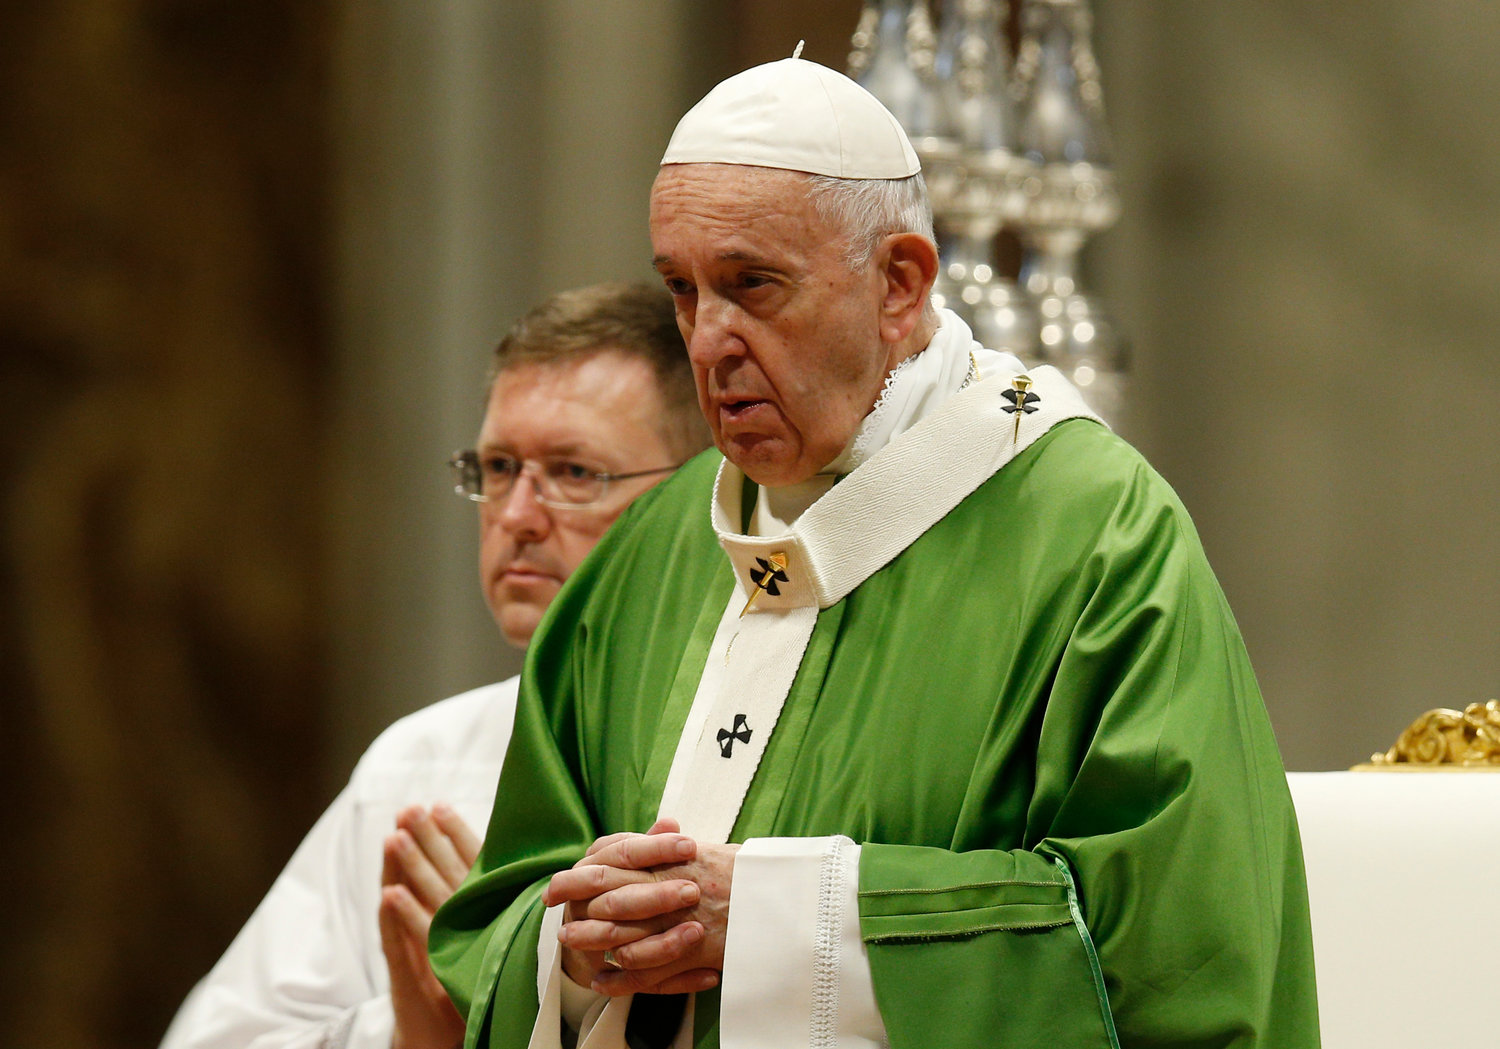 Pope Francis celebrates a Mass marking World Day of the Poor in St. Peter’s Basilica at the Vatican Nov. 17, 2019. After the Mass the Pope at lunch with hundreds of poor people.